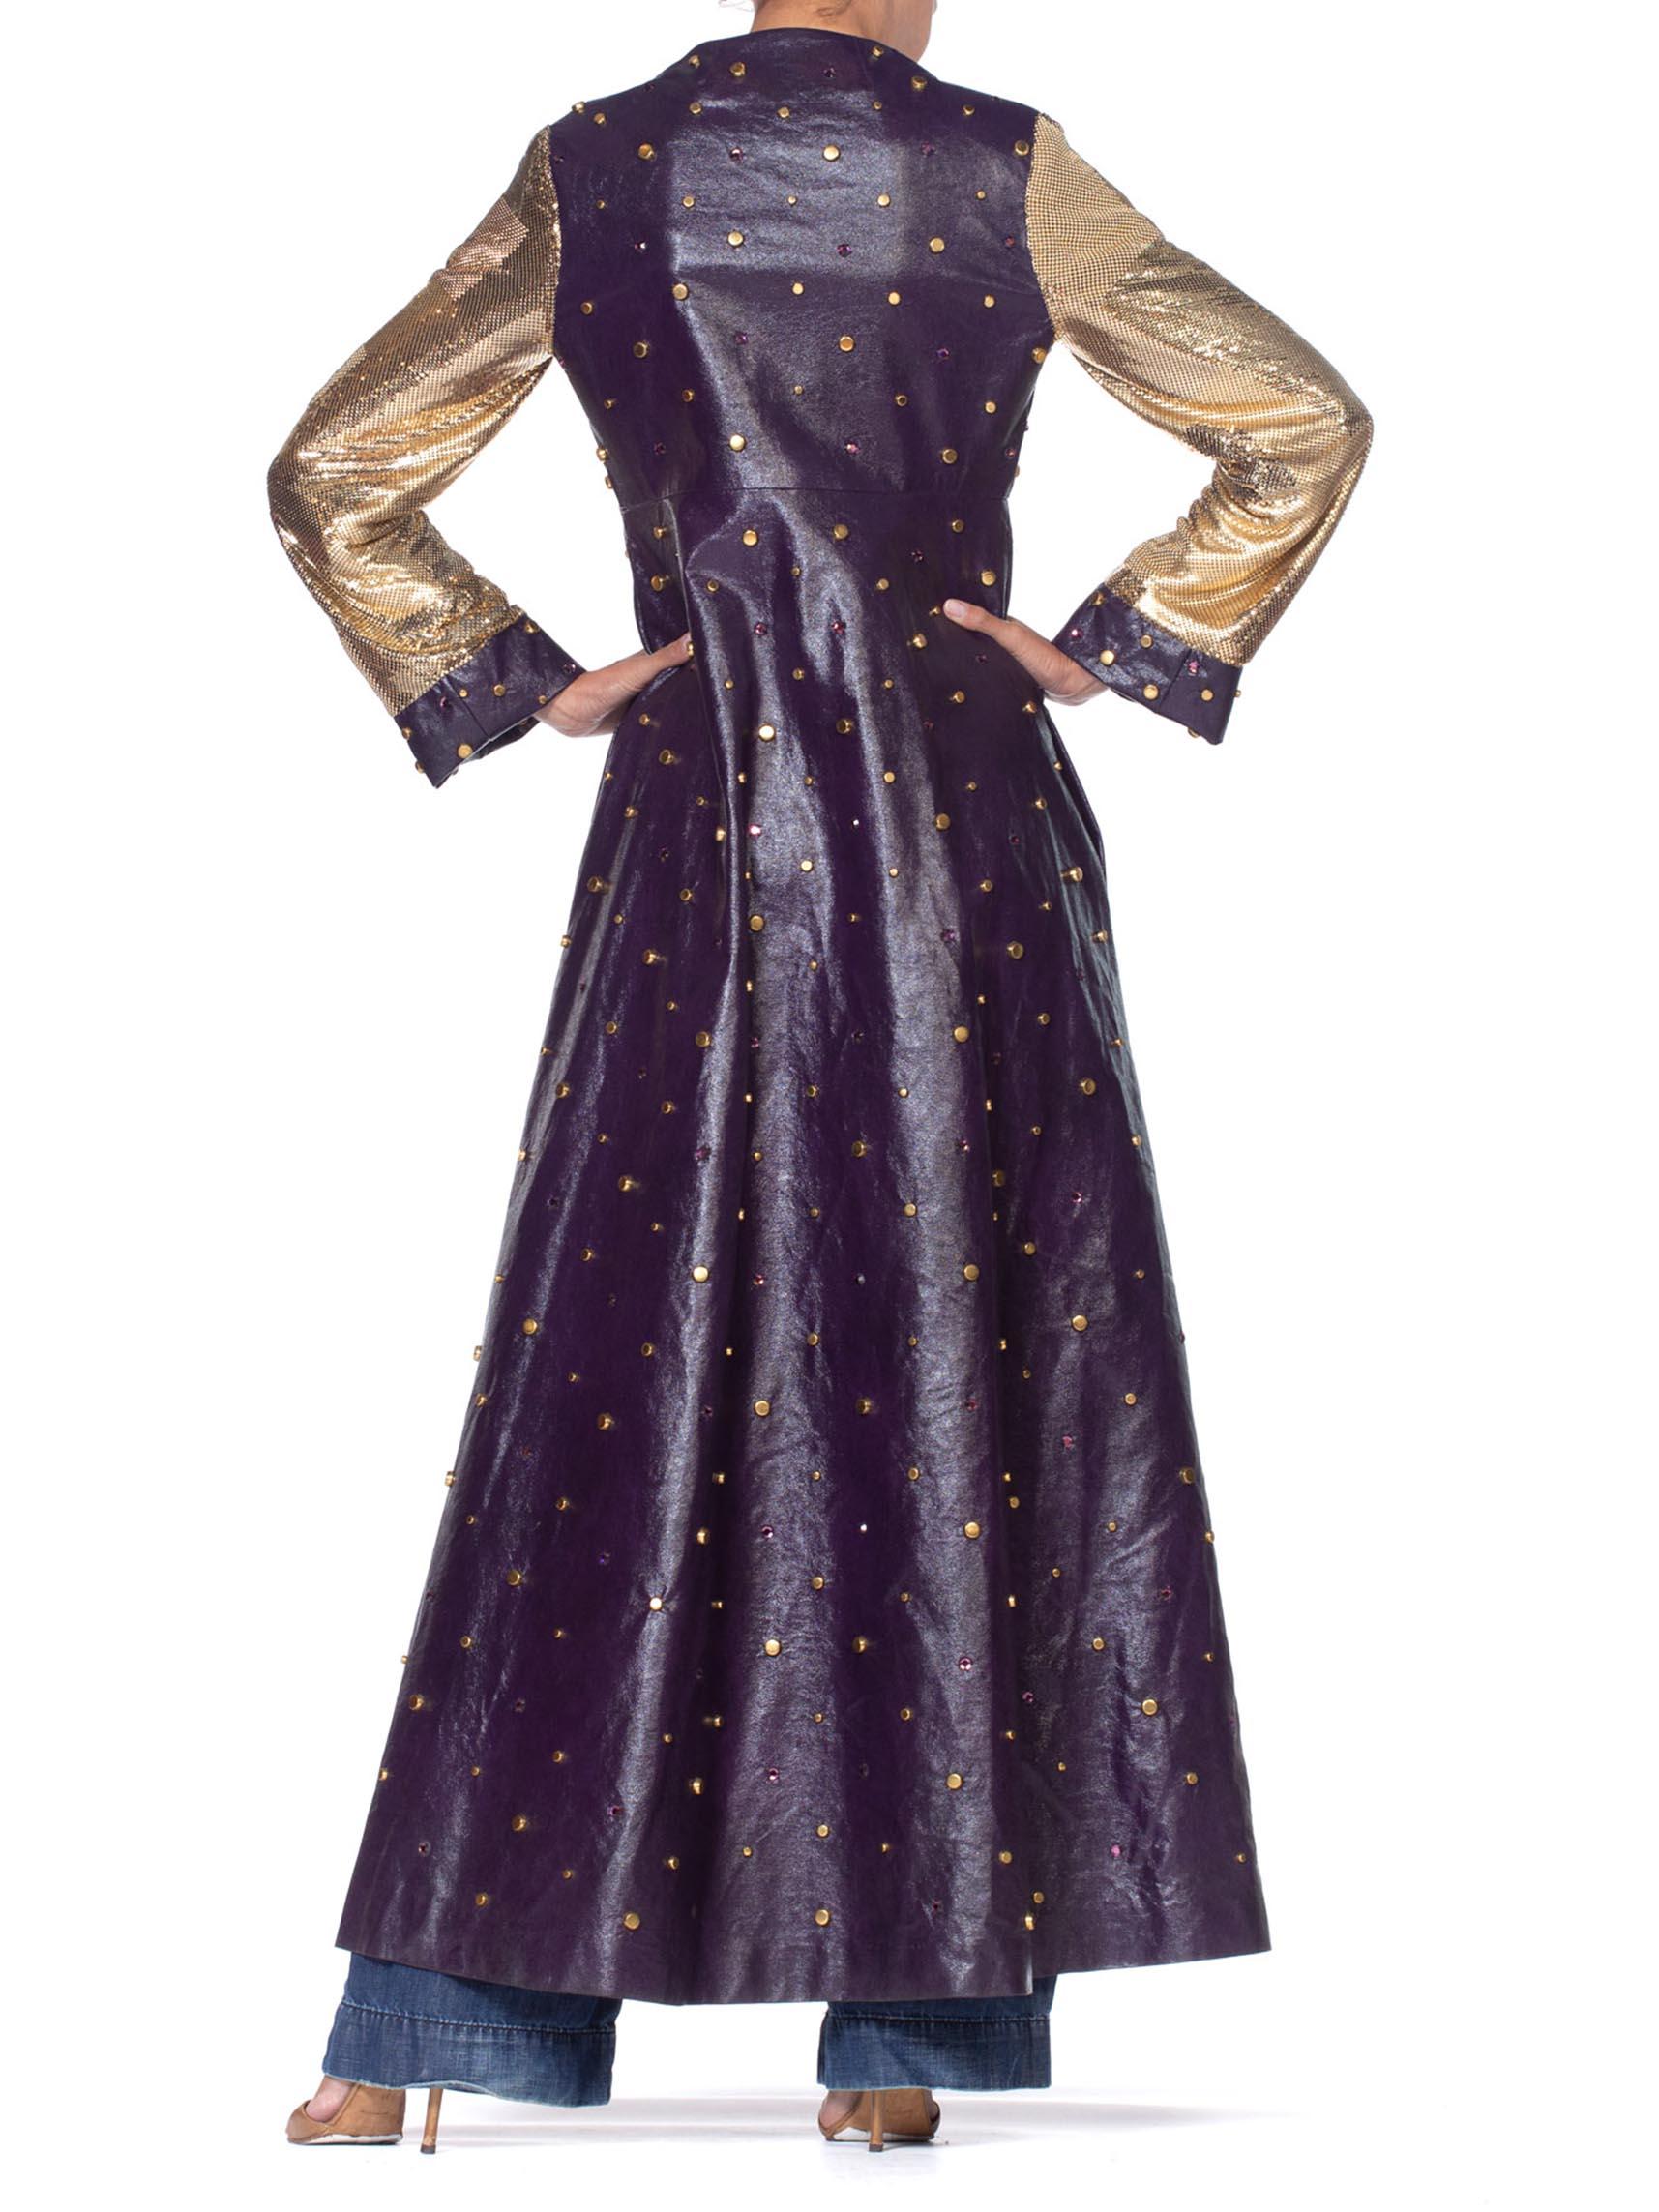 MORPHEW COLLECTION Eggplant Purple Crystal Studded Pleather Maxi Coat With Gold For Sale 2